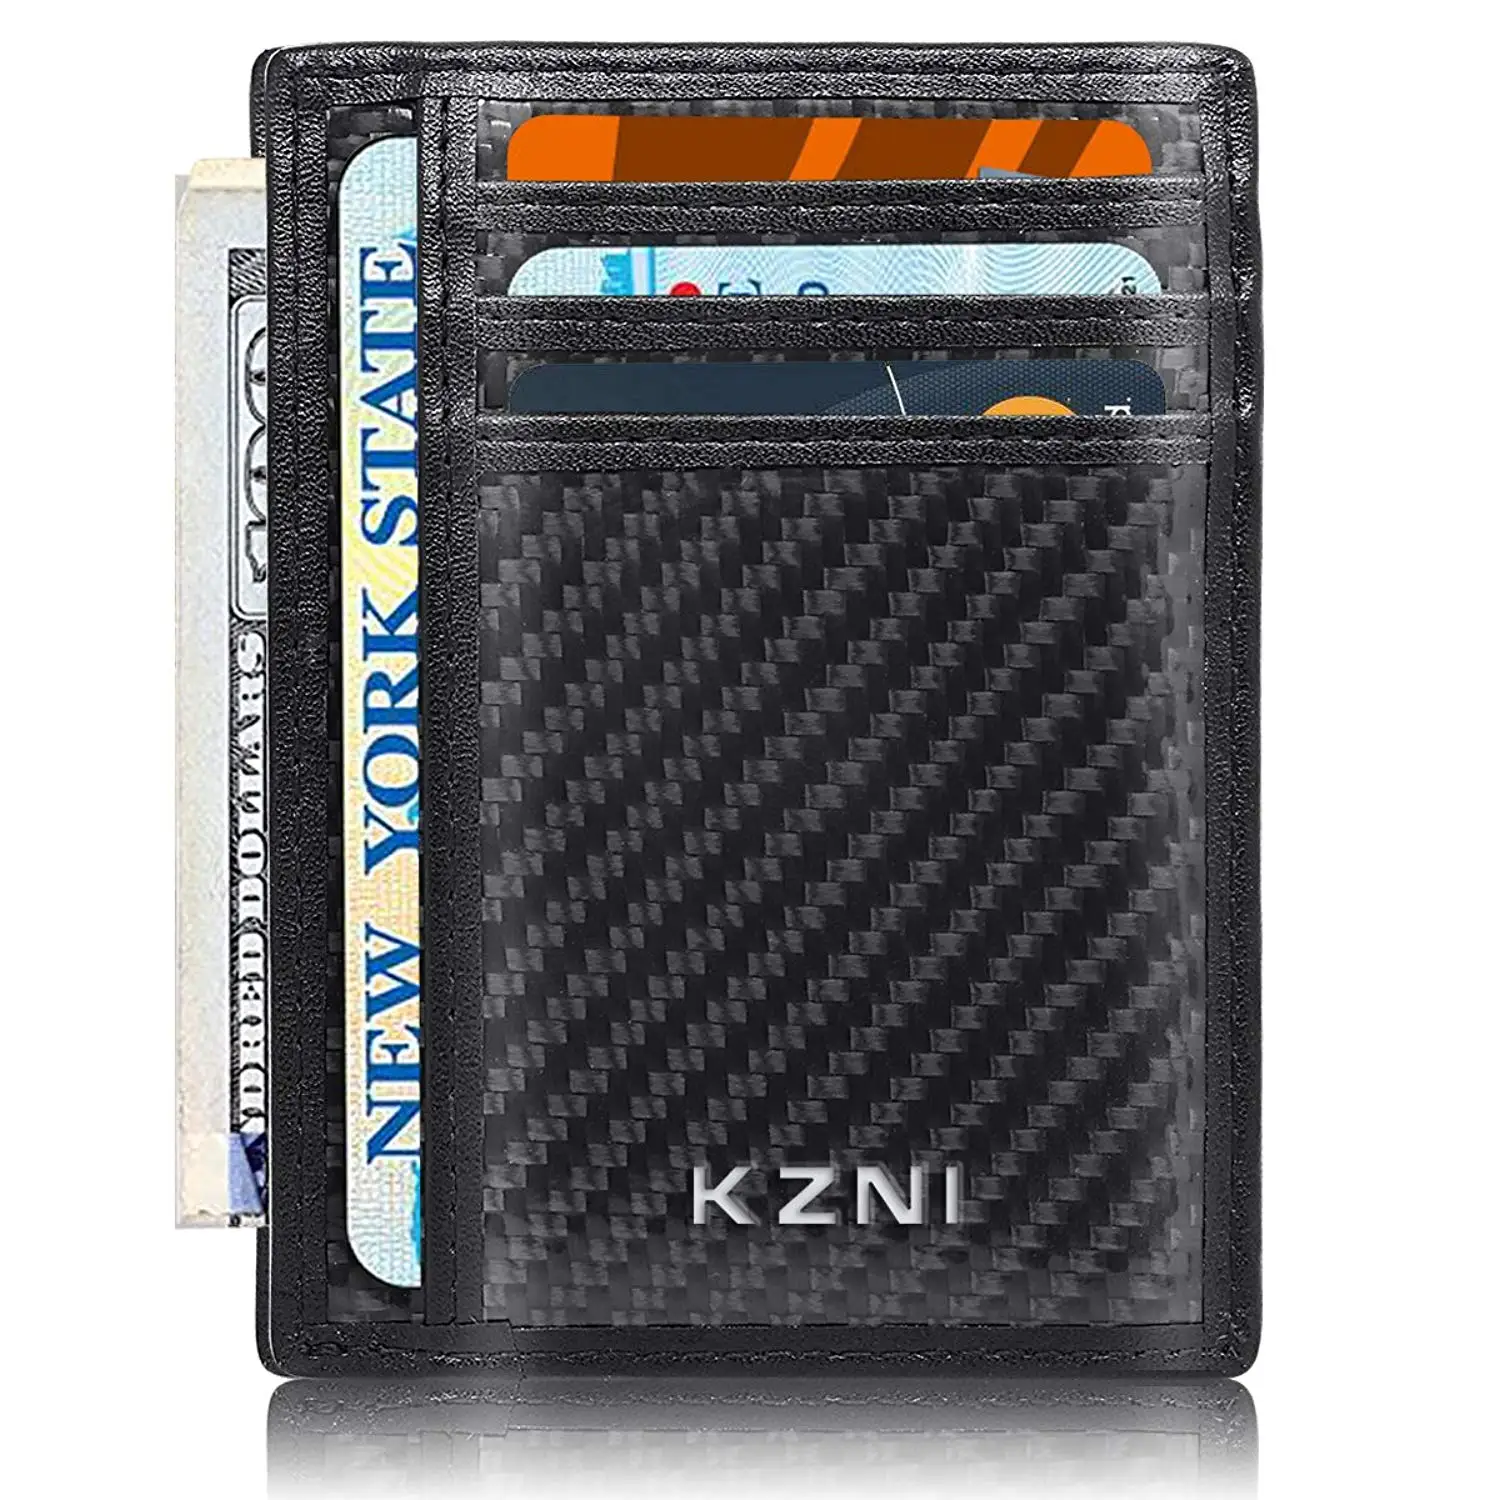 Cheap Money Clip And Card Holder Wallet Find Money Clip And - 